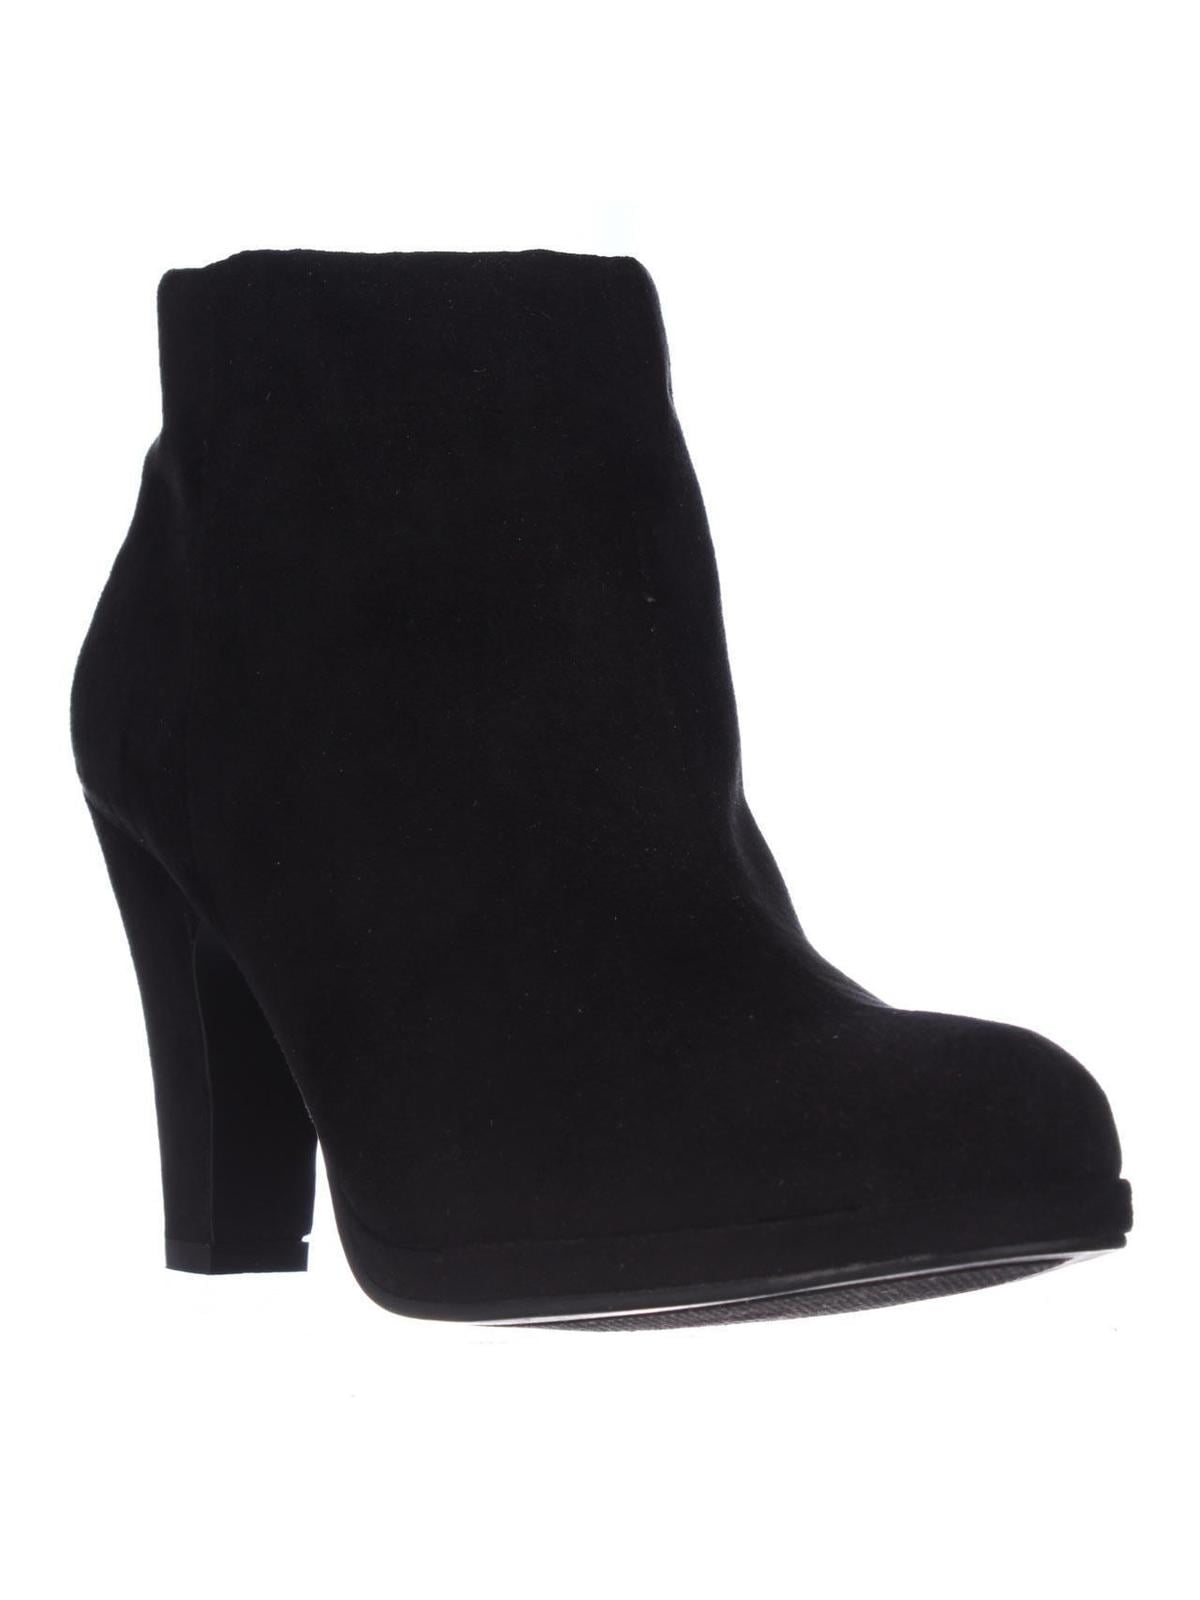 Womens Rampage Benzley Ankle Boots, Black - Walmart.com